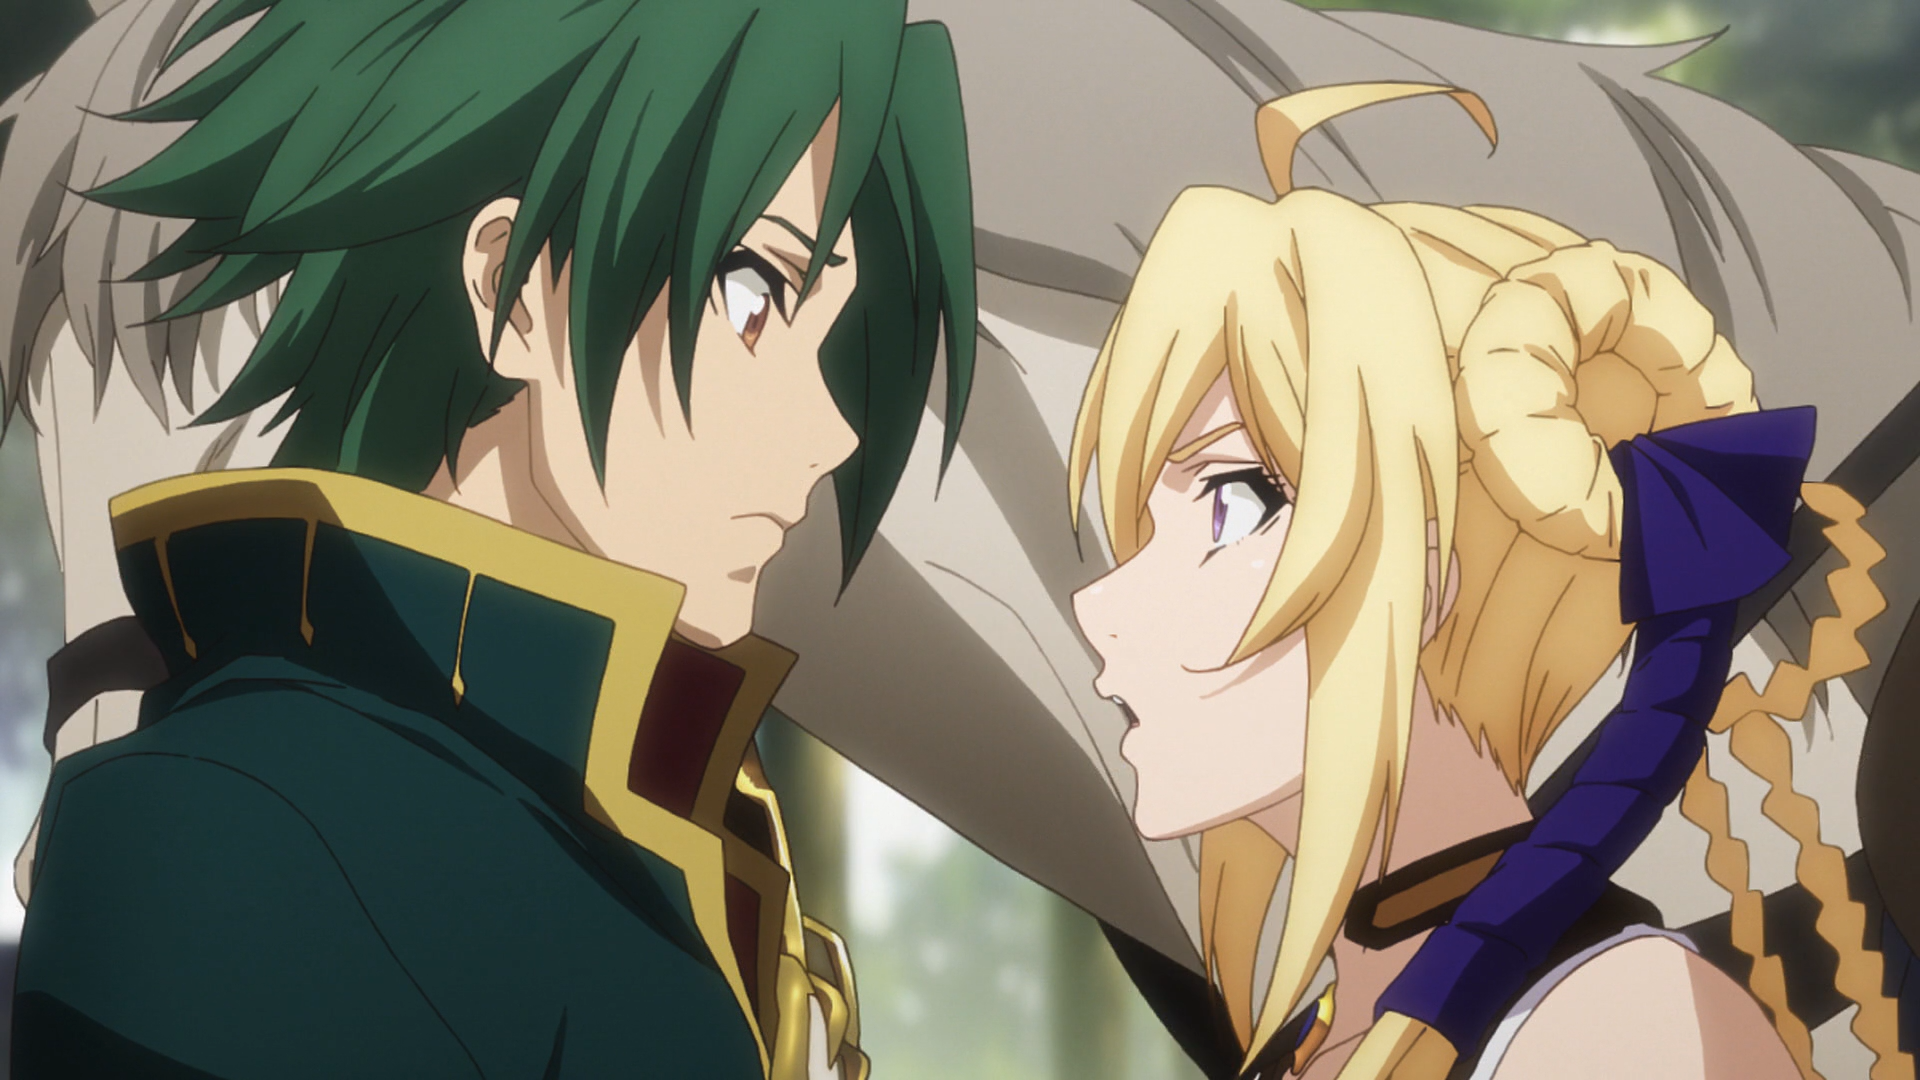 Record of Grancrest War Anime Listed With 24 Episodes - News - Anime News  Network